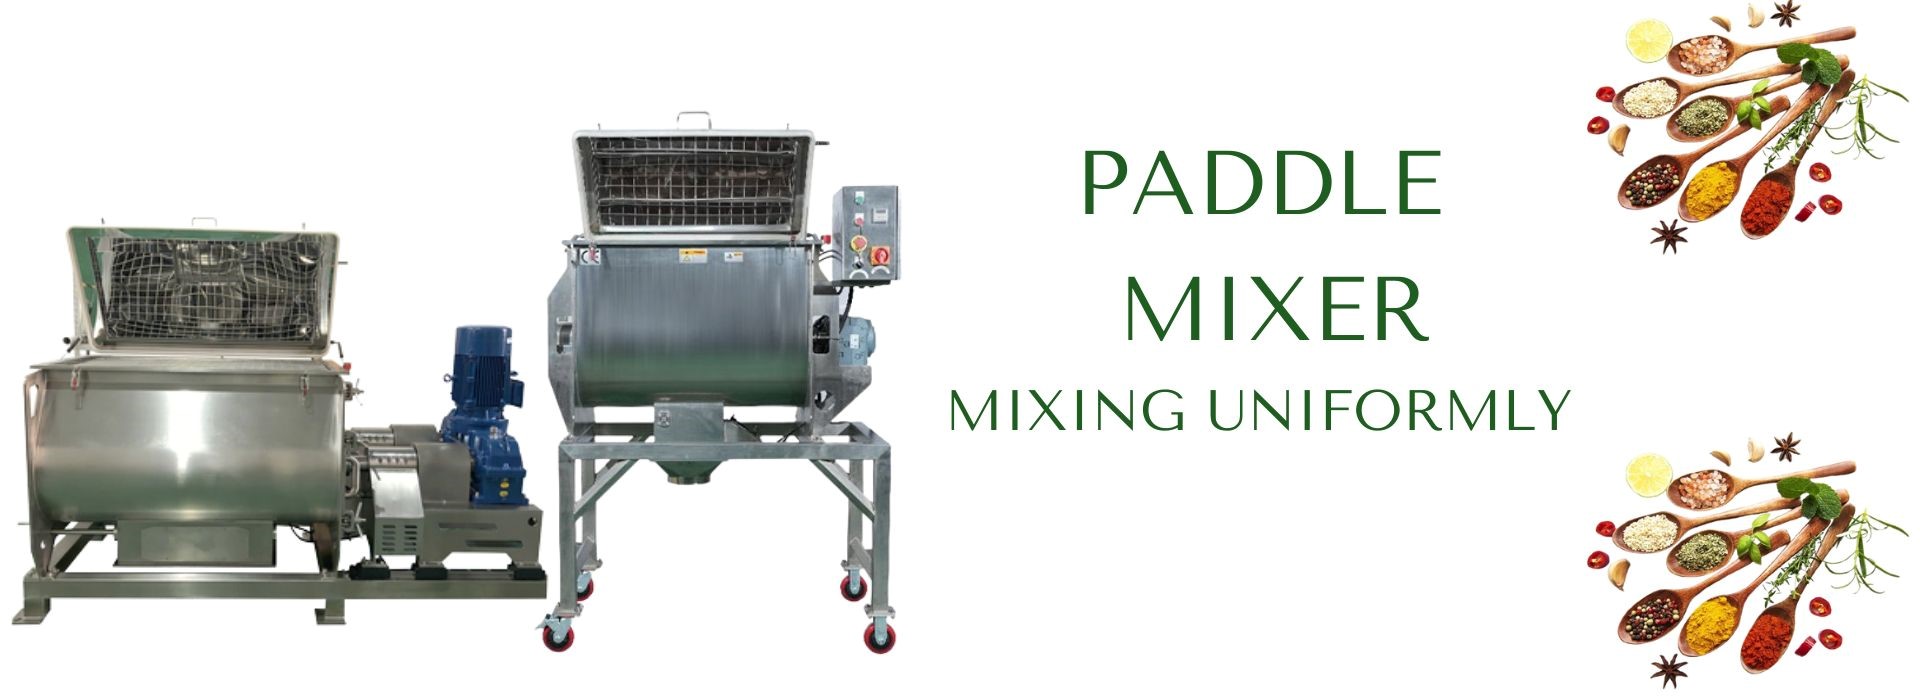 What is the Paddle Mixer Design1